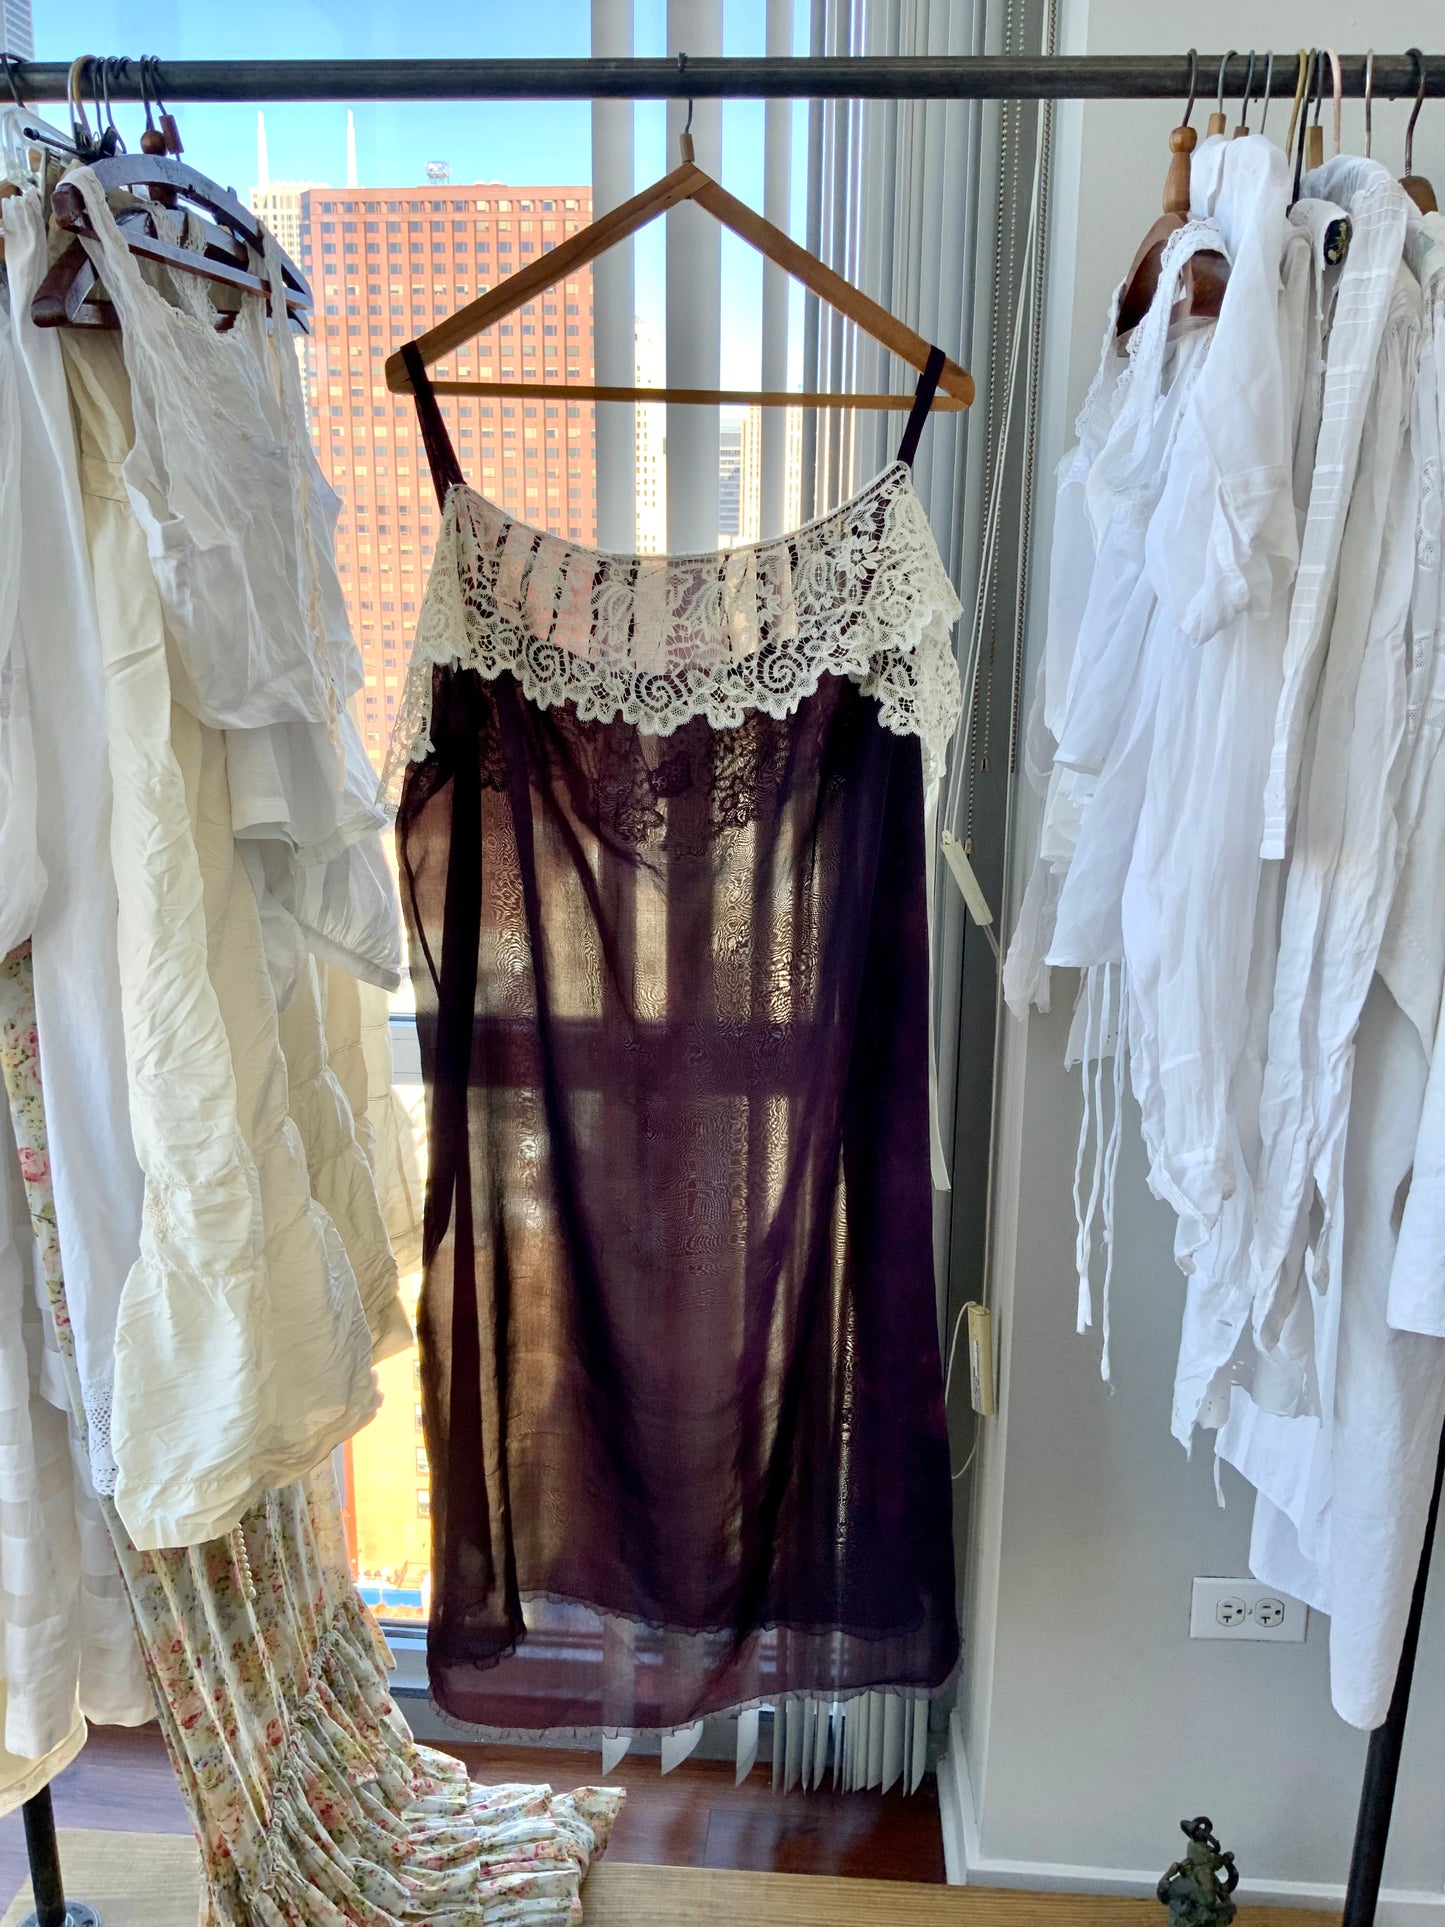 Hand Dyed Nightgown - 20s